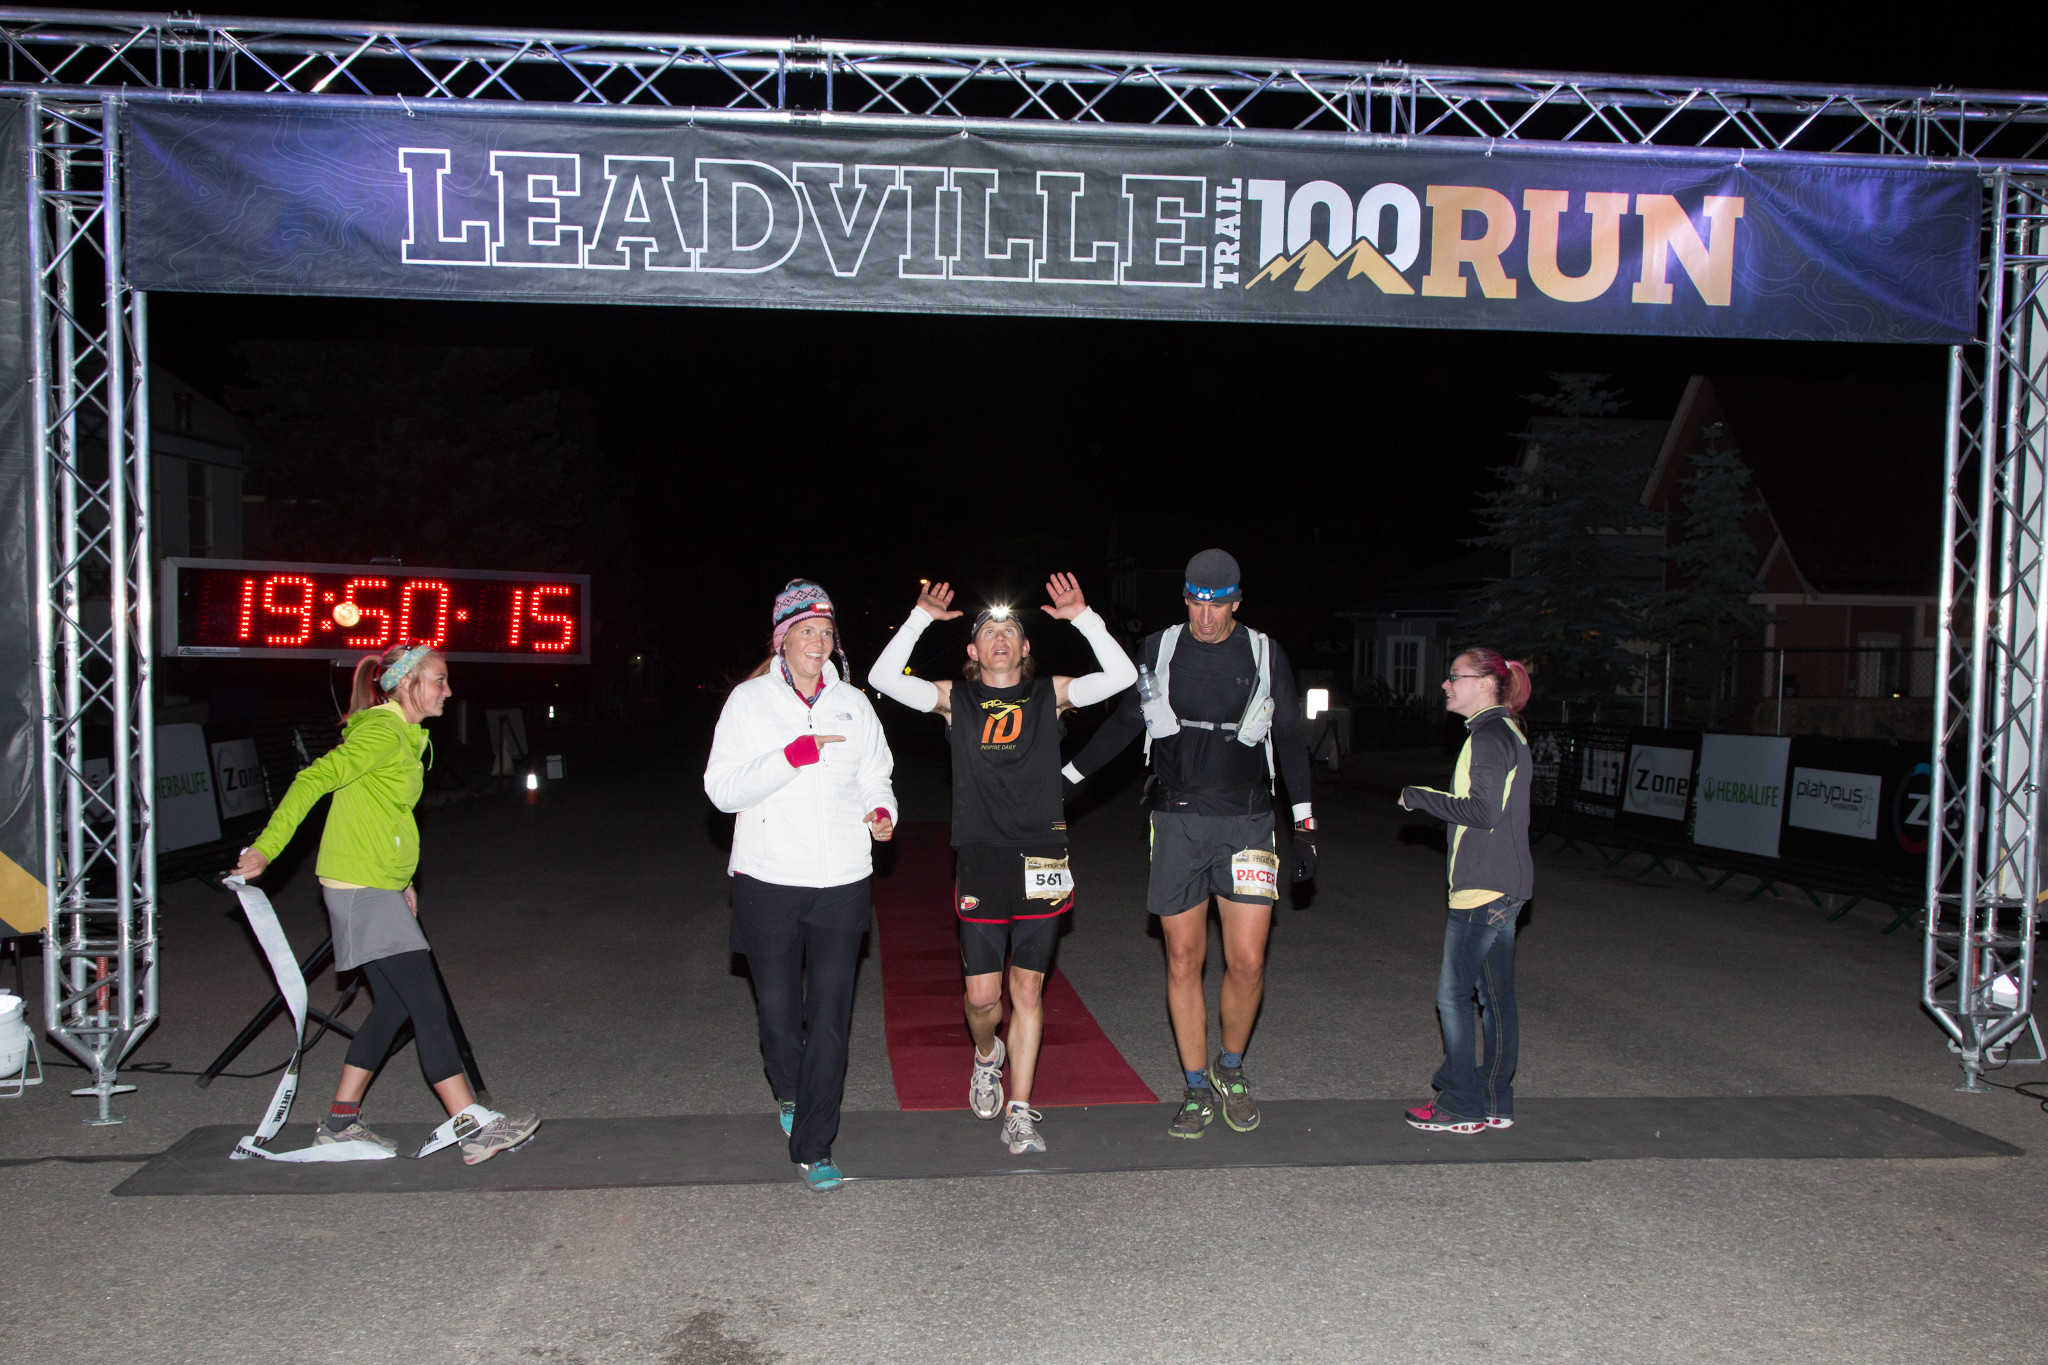 The Ultimate Packing List for the CenturyLink Leadville Trail 100 Run presented by La Sportiva